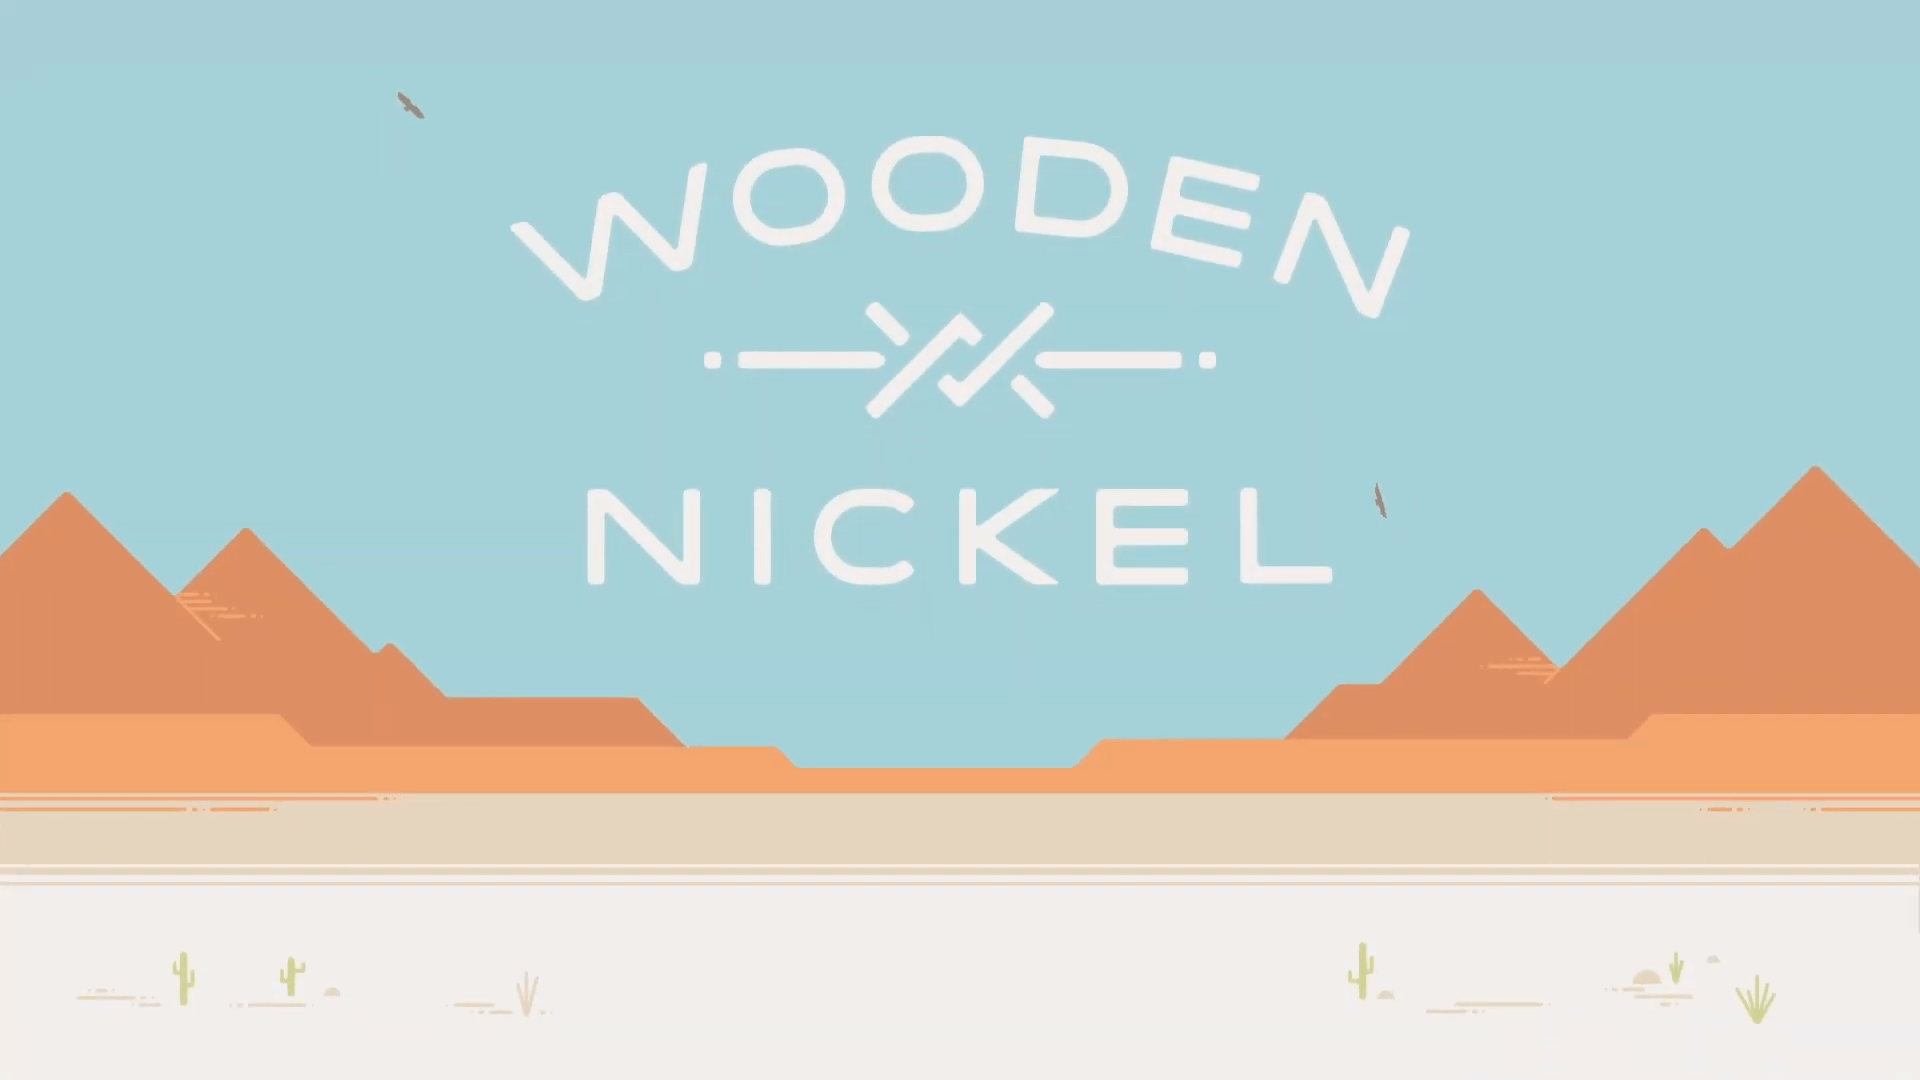 Check Out The Trailer For Wooden Nickel, A New Frontier Adventure From The Team Behind Burly Men At Sea